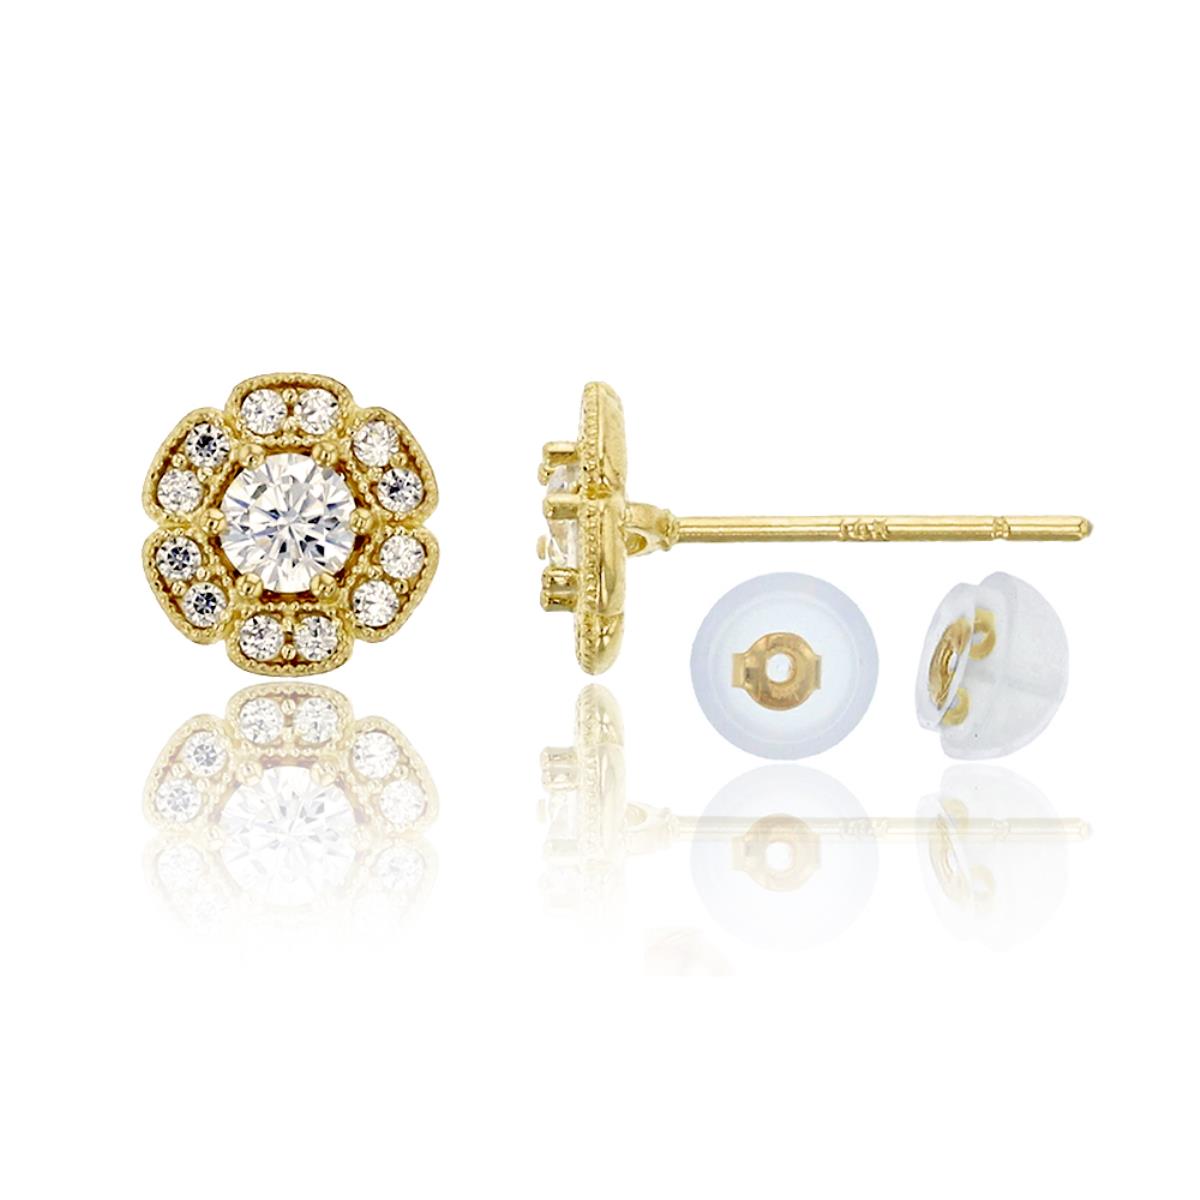 10K Yellow Gold Pave 3mm Round Cut Milgrain Flower Stud & 10K Silicone Back